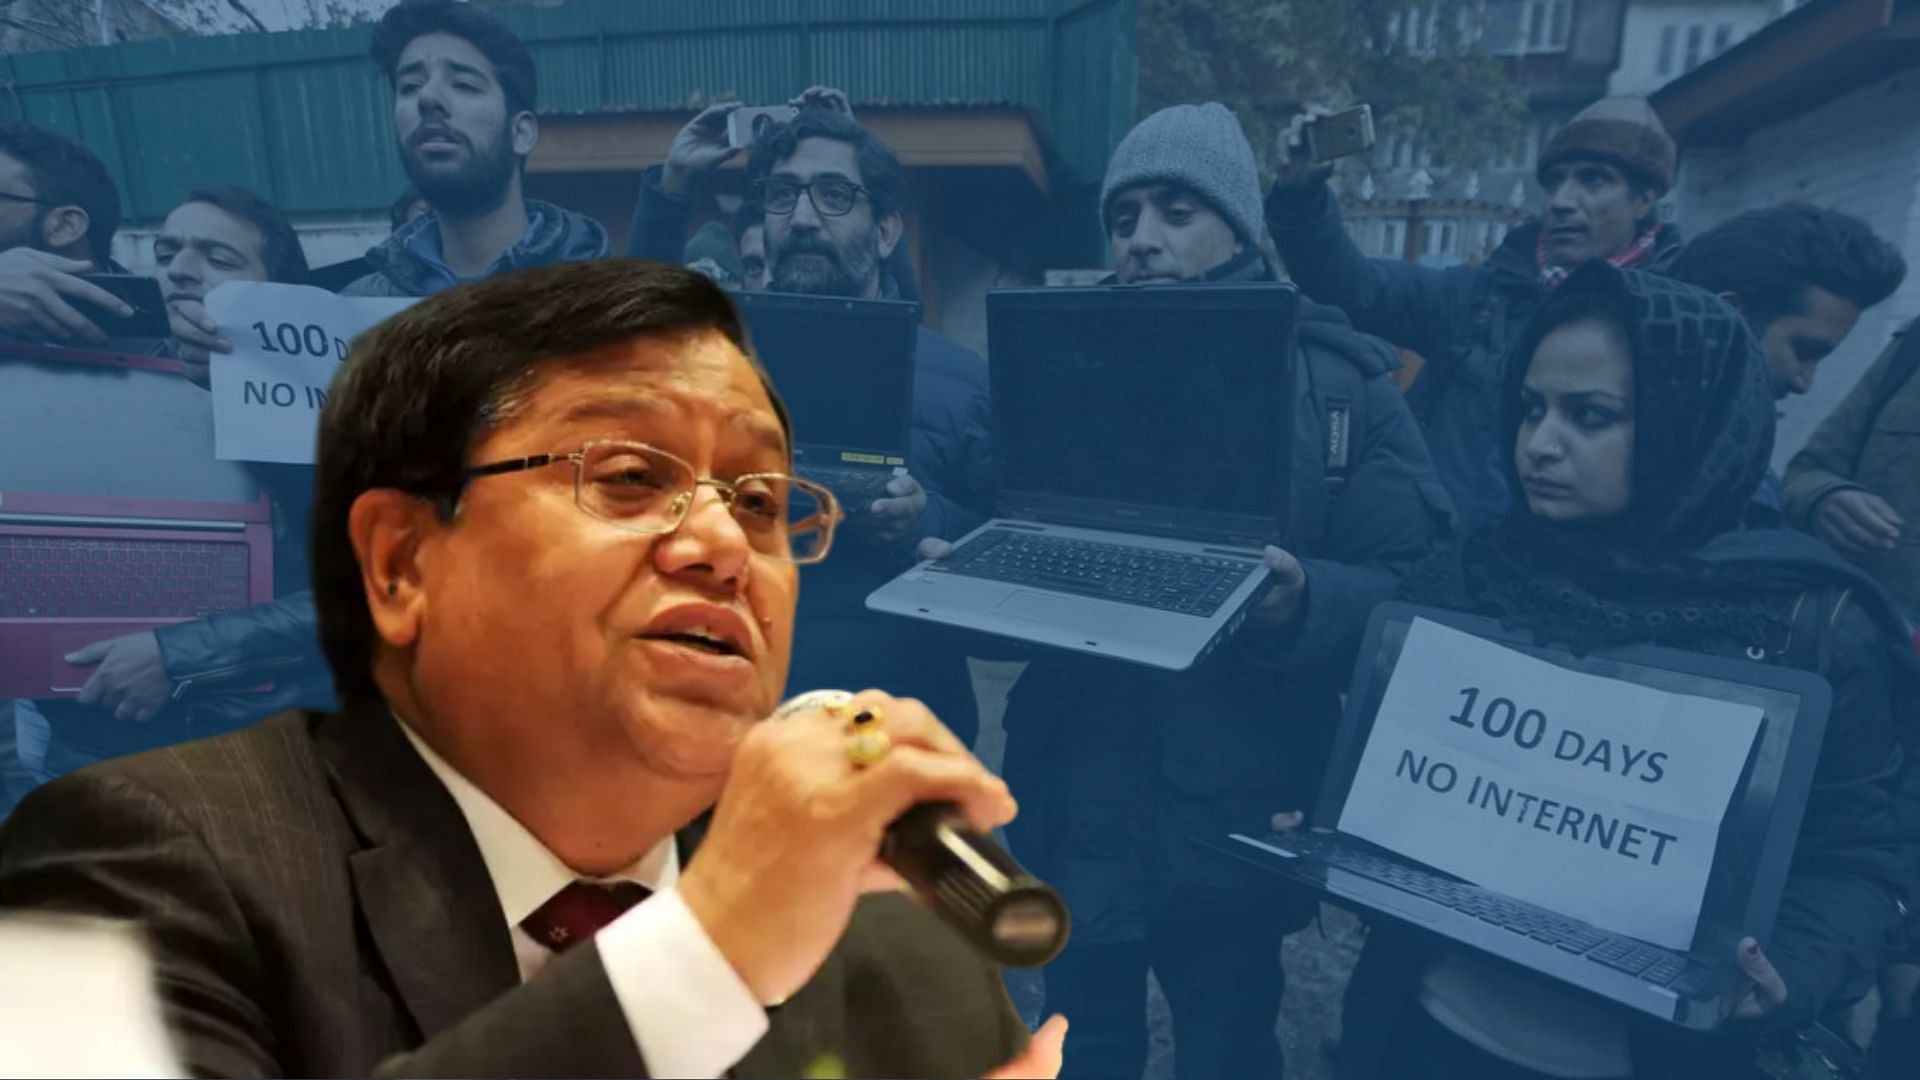 “What do you watch on Internet there? What e-tailing is happening? Besides watching dirty films, you do nothing,” said Niti Aayog member VK Saraswat.